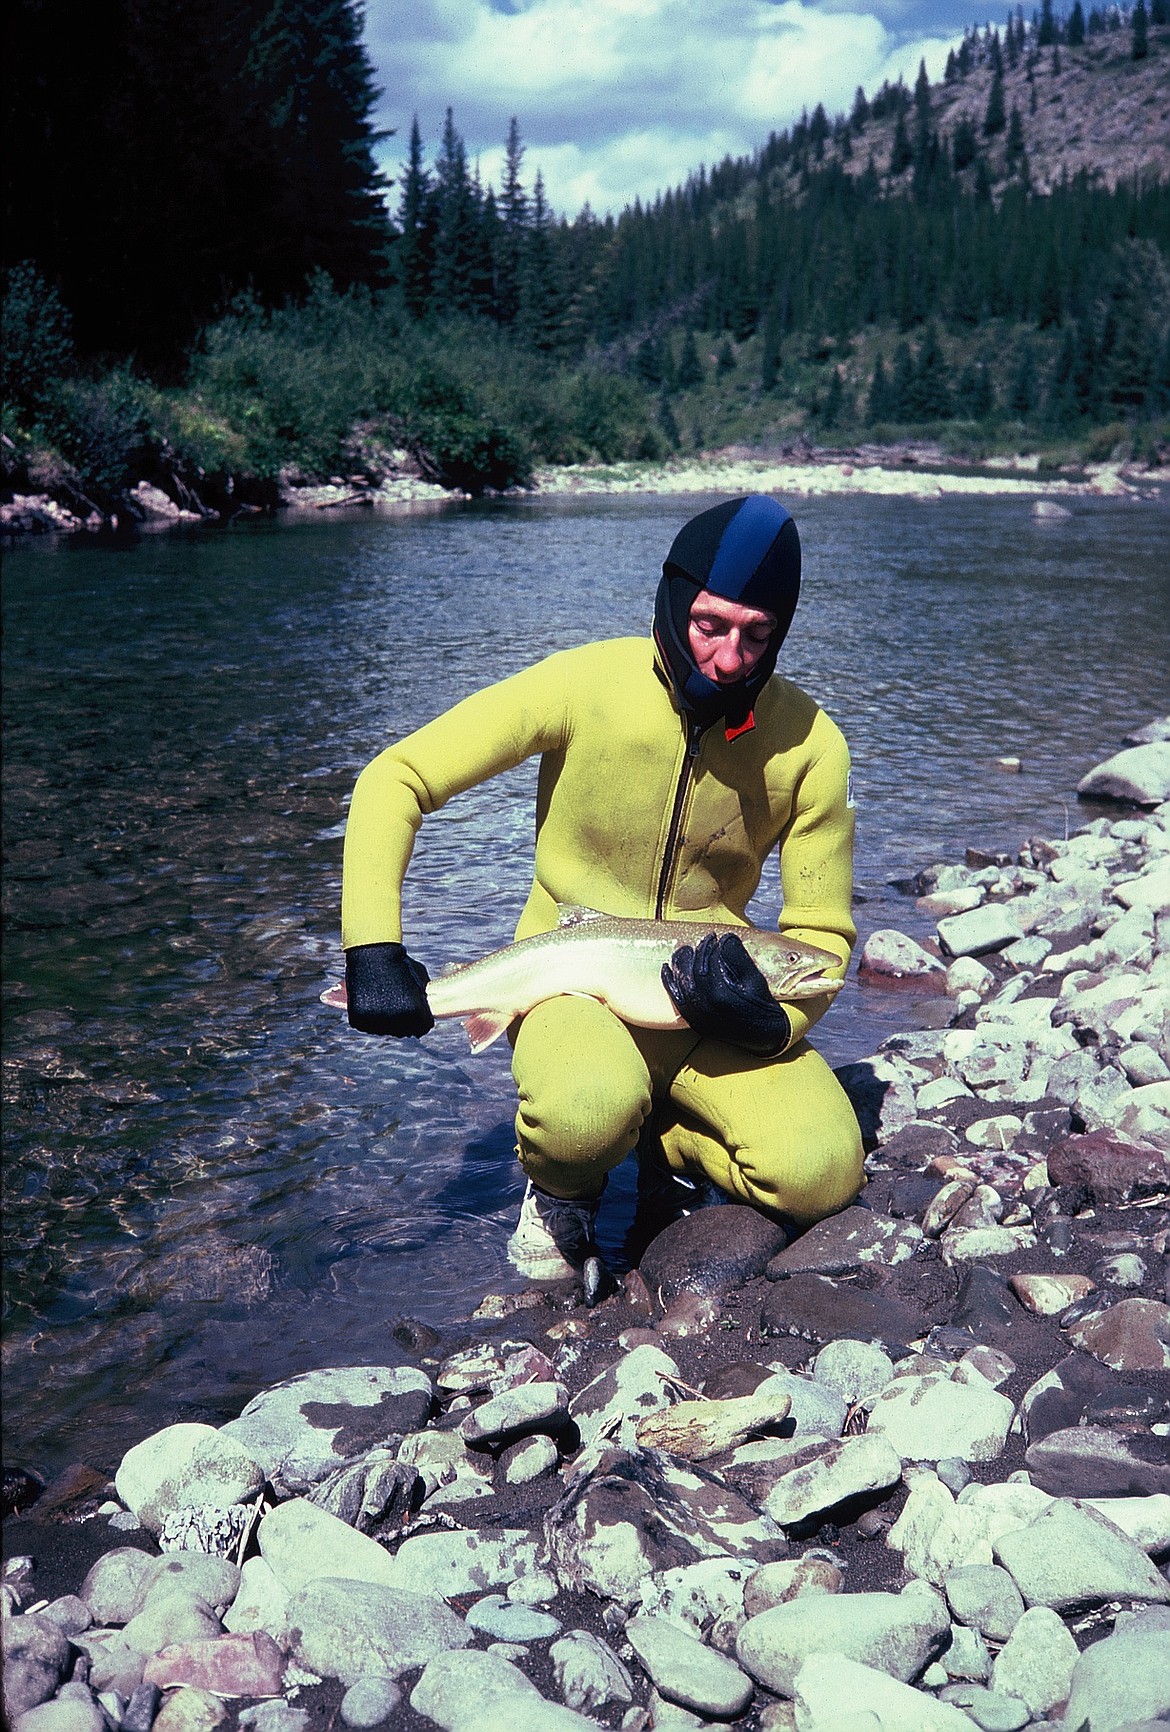 John Fraley below Clack Creek, about a mile from the Bob Marshall Wilderness, in August of 1980. (Photo courtesy of John Fraley)